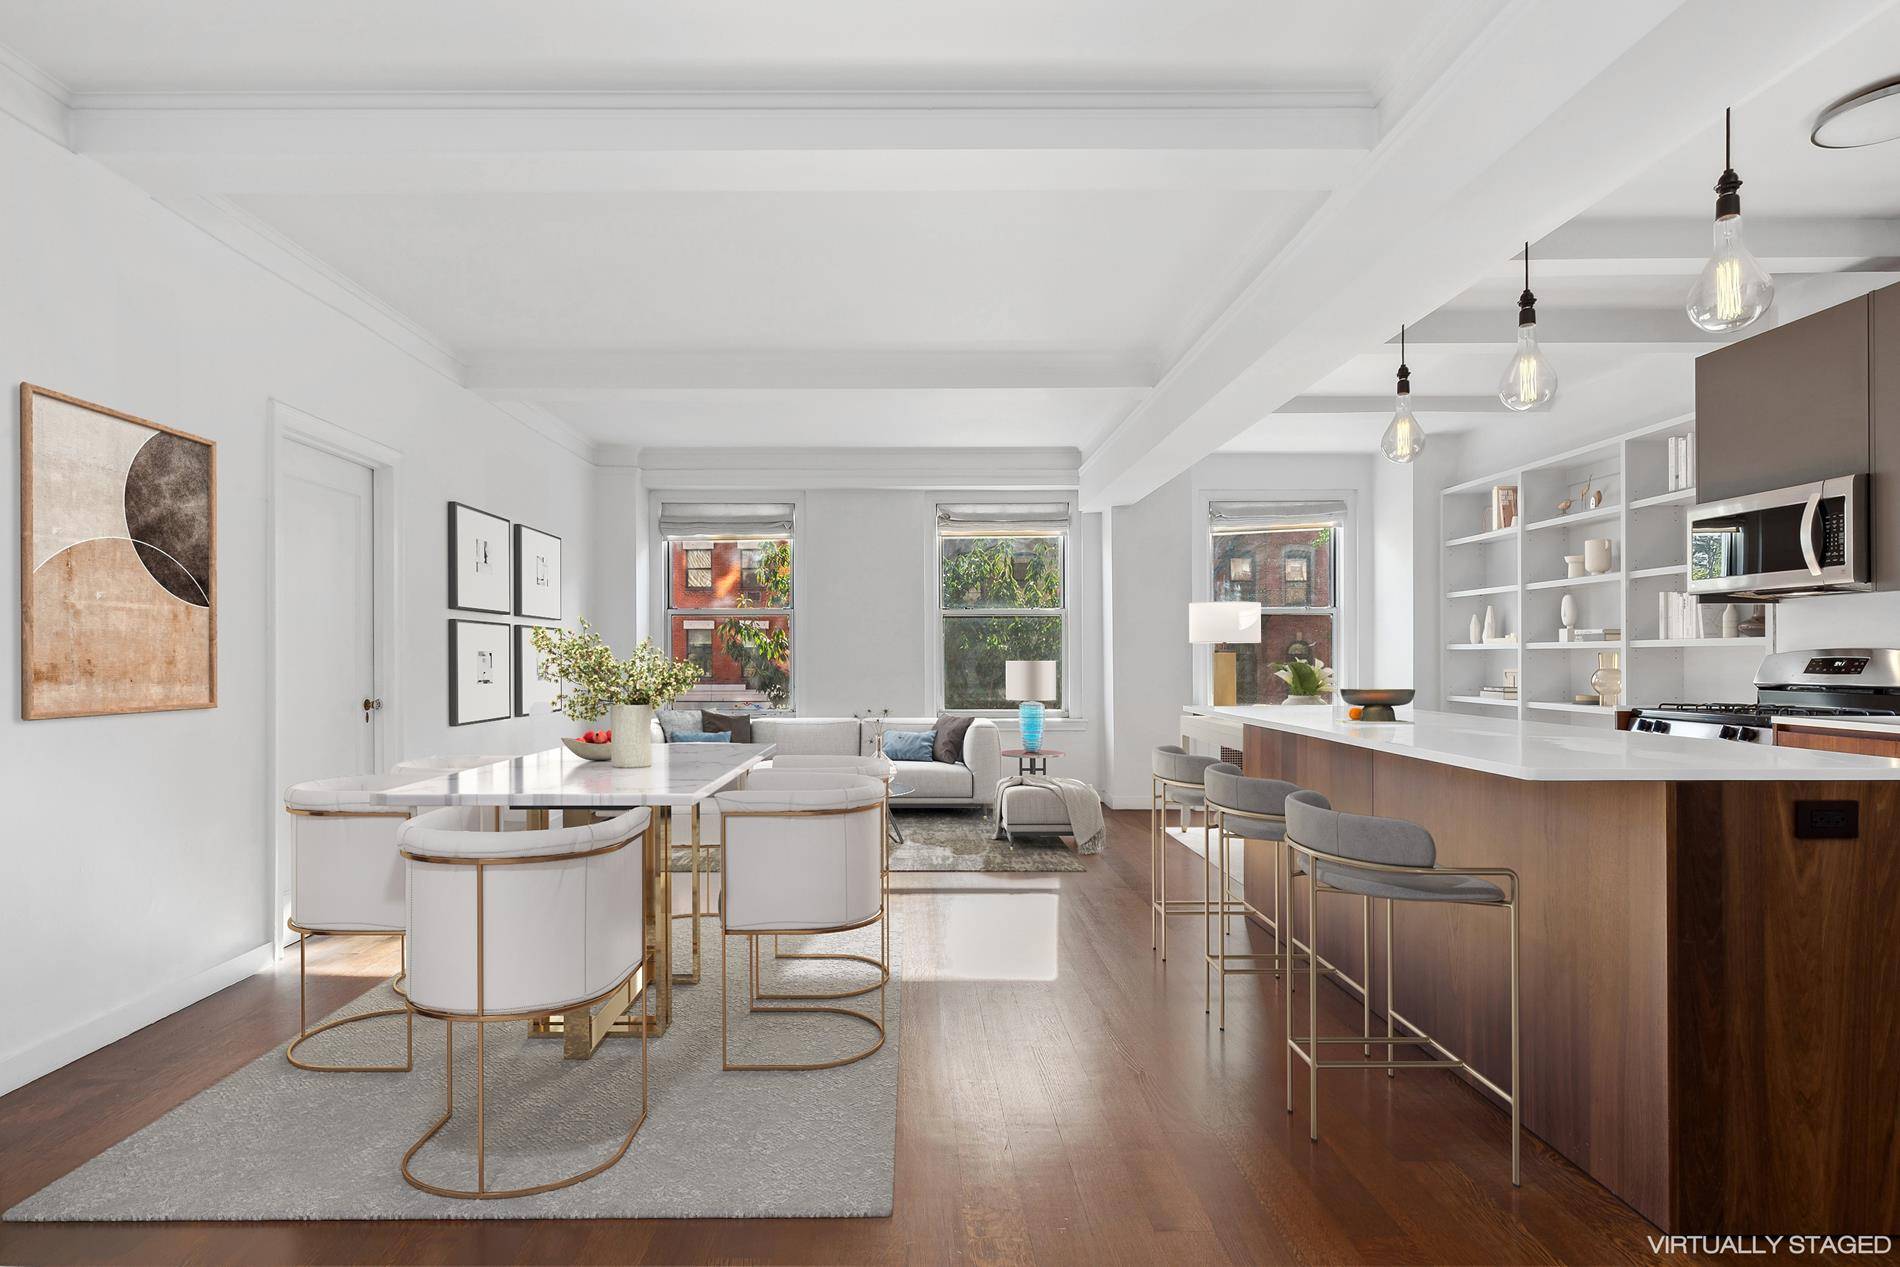 Stunning ! Residence 2B at 242 East 19th Street exemplifies classic prewar elegance and proportions seamlessly fused with modern style and convenience.